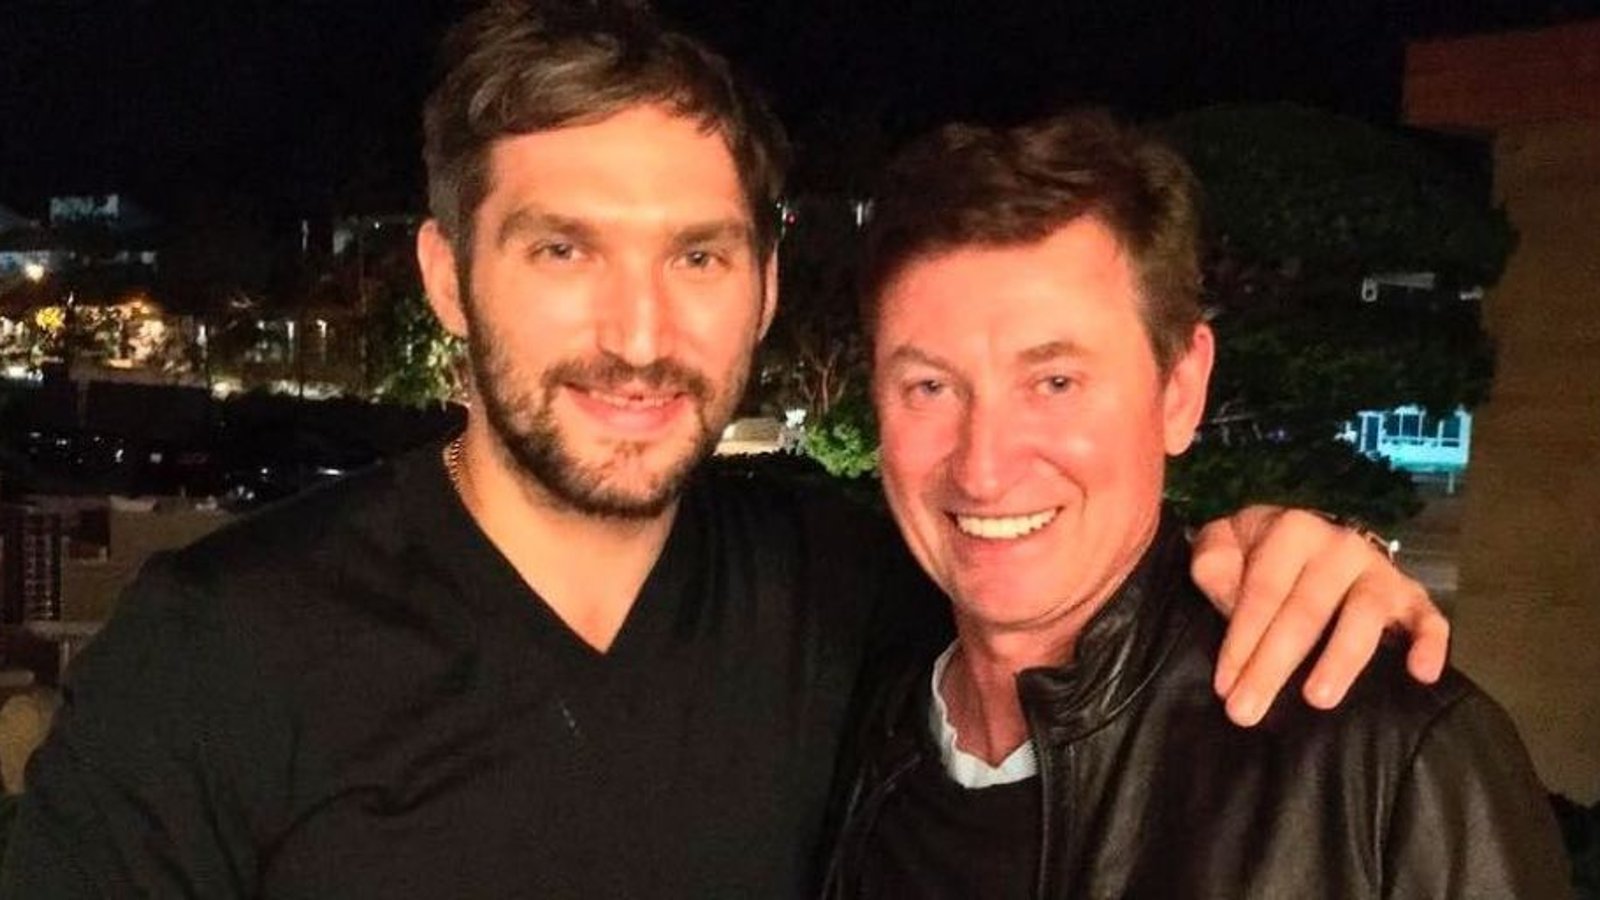 Gretzky and Ovechkin to face off in interview 